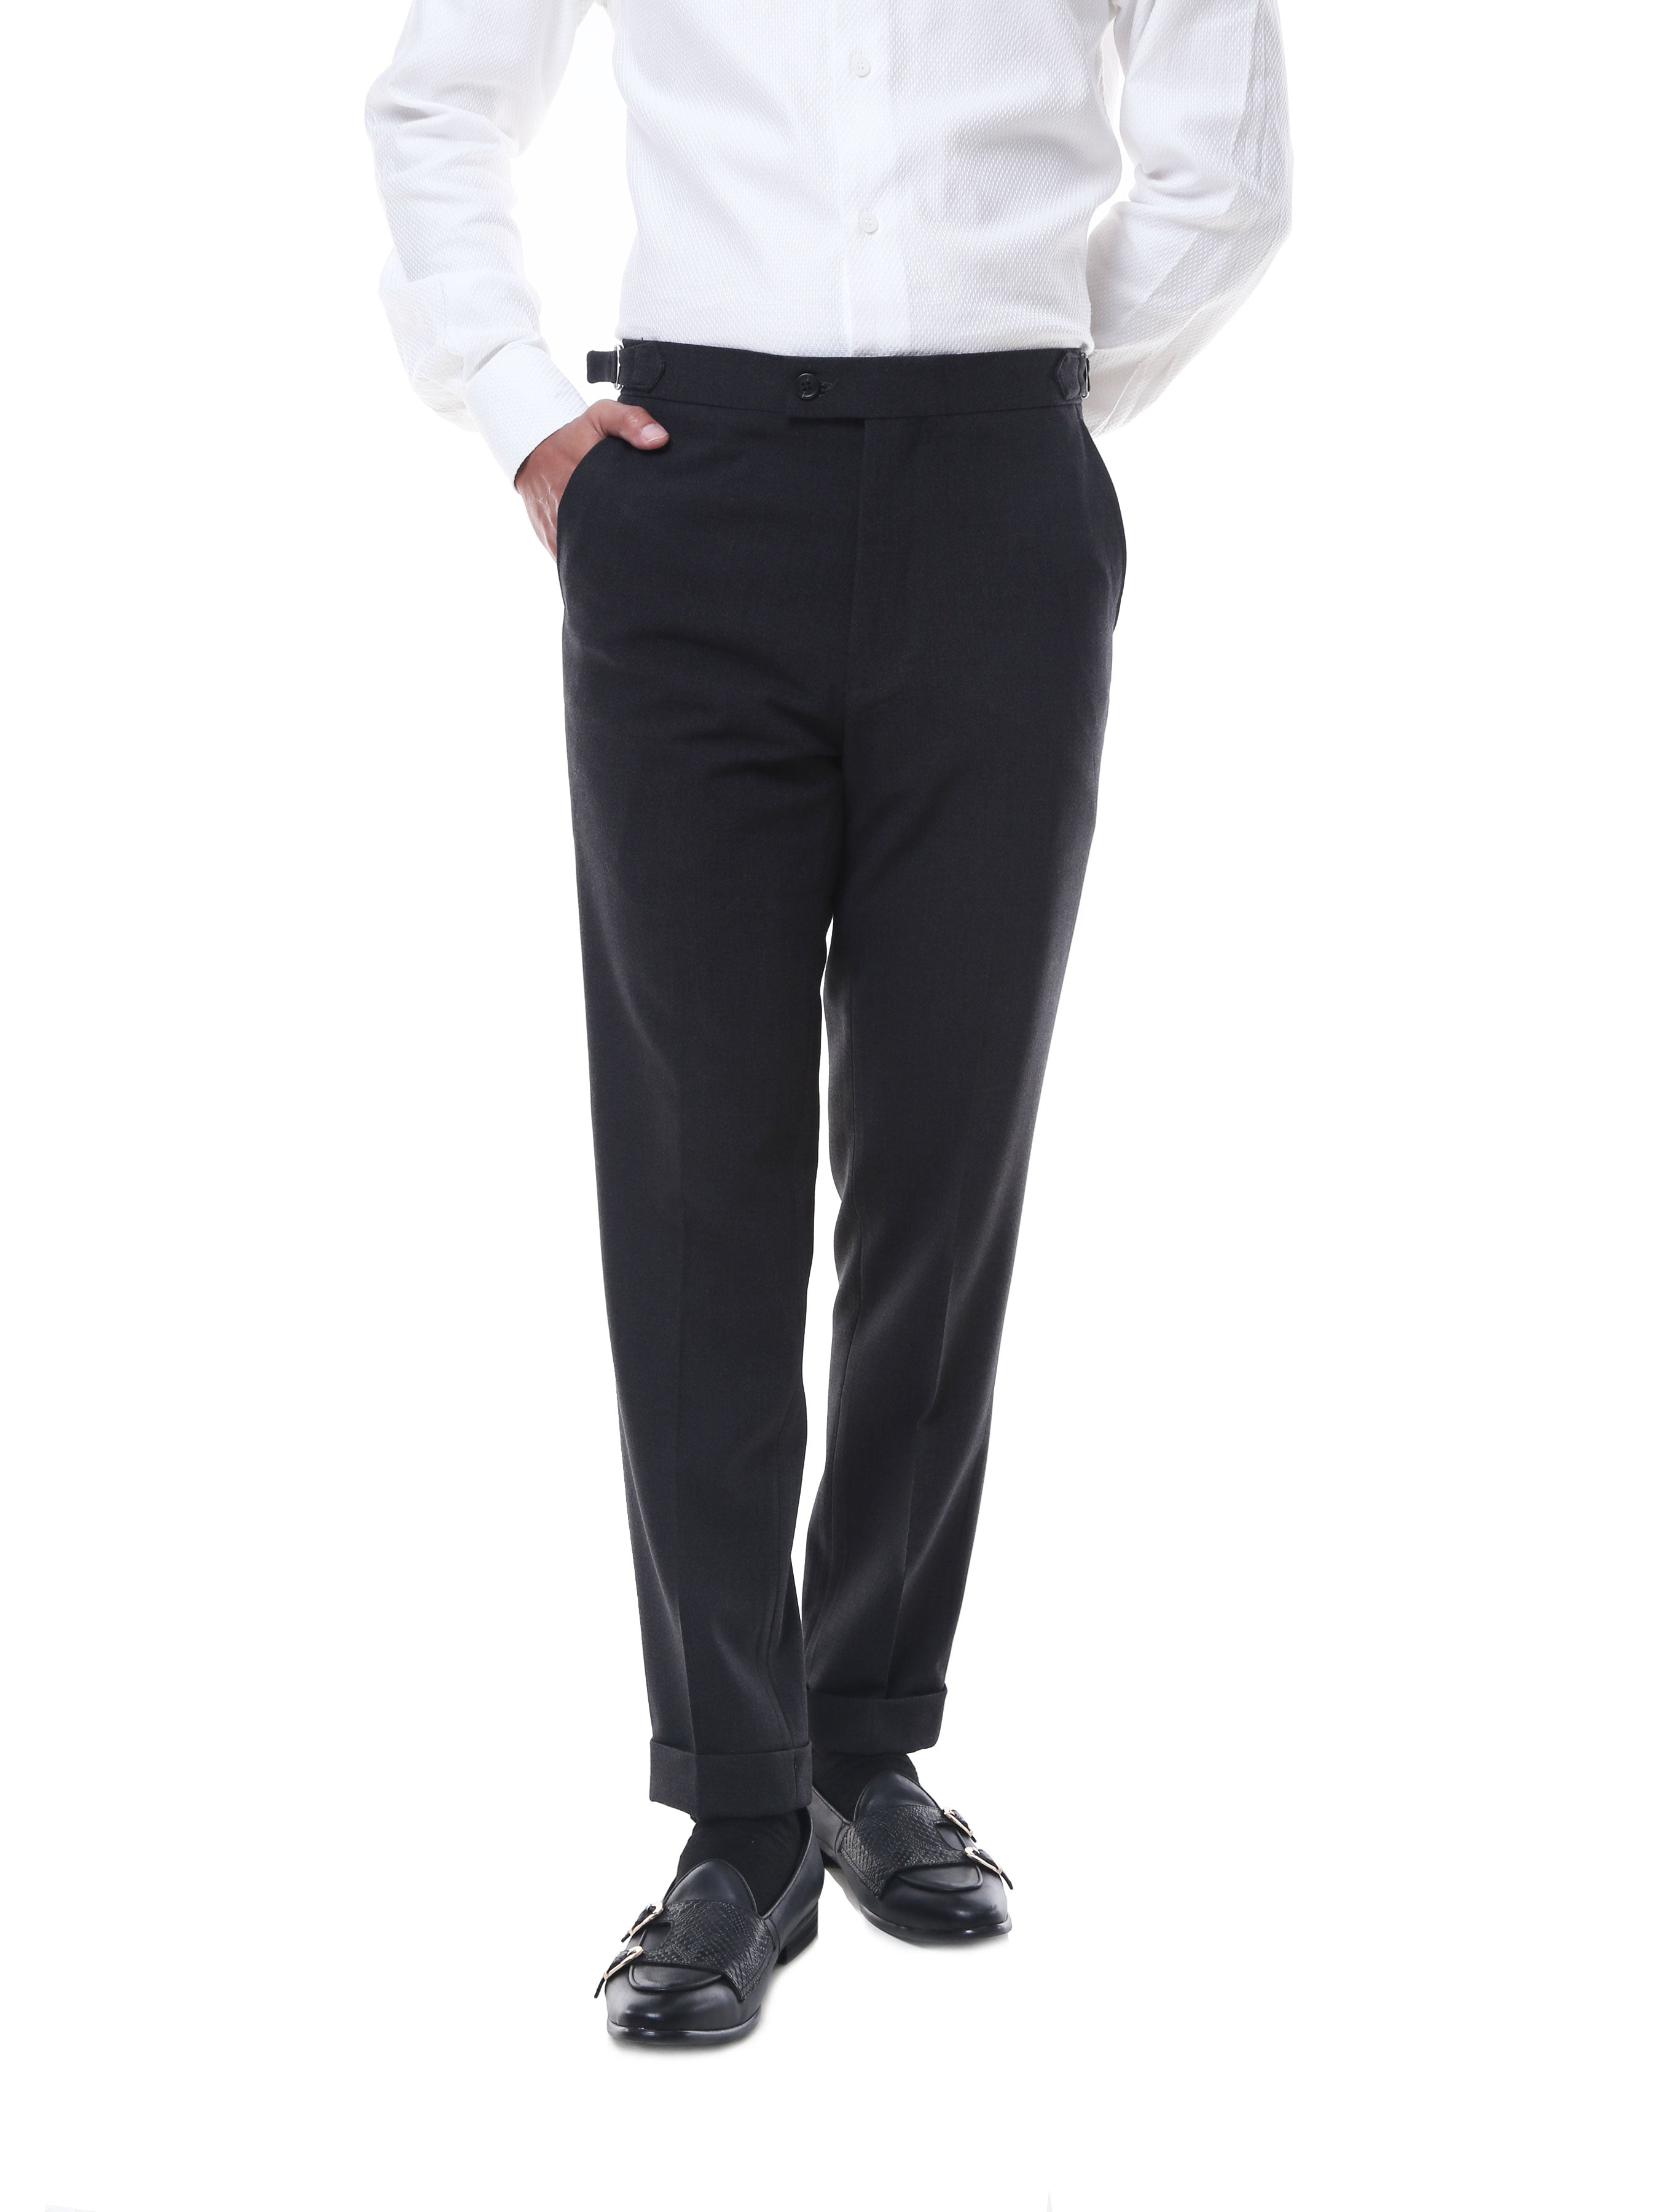 Trousers With Side Adjusters - Dark Grey Plain Cuffed (Stretchable) - Zeve Shoes